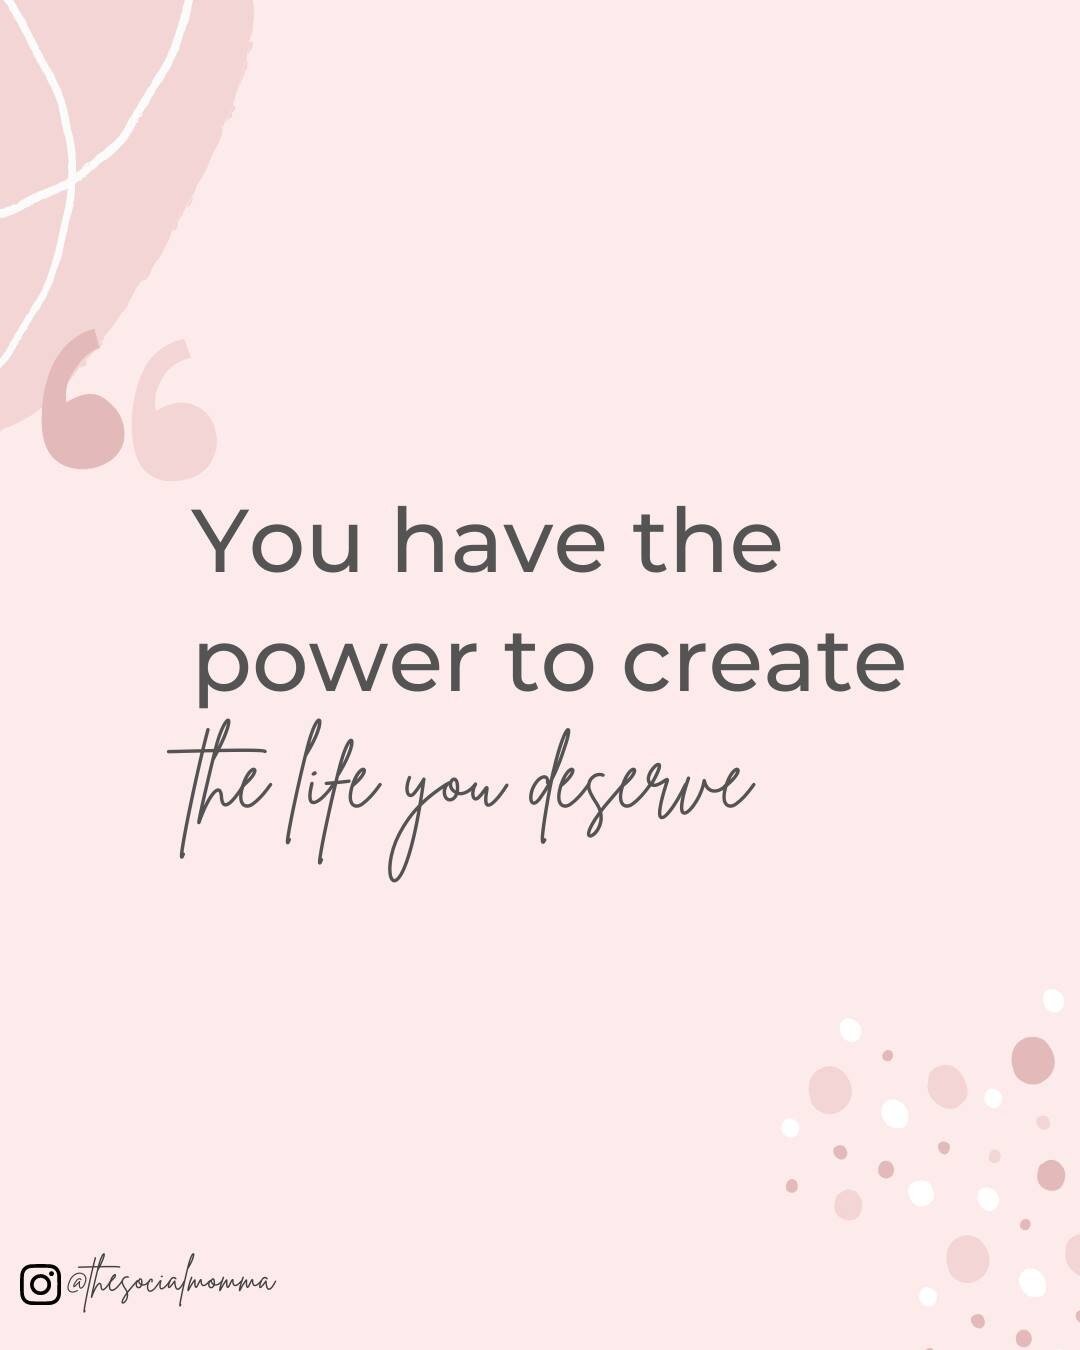 Do you agree with me?

It may seem like things will go against you at times but remember - you are good, you are capable, you can create the life you deserve.

Stop relying on manifesting to just magically make things happen. You have to put in the t